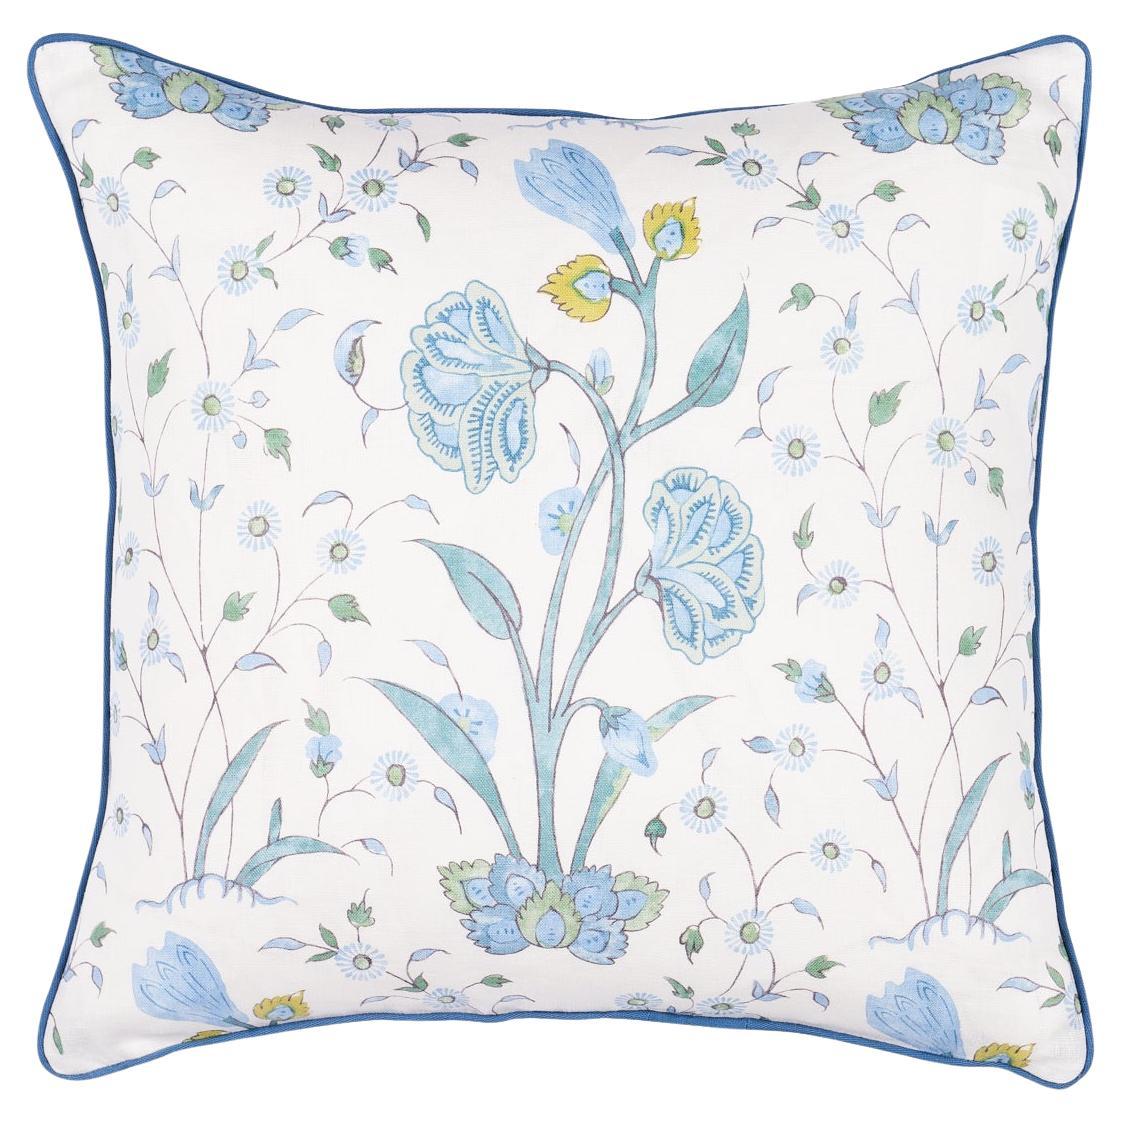 Schumacher Khilana Floral 20" Pillow in Peacock For Sale